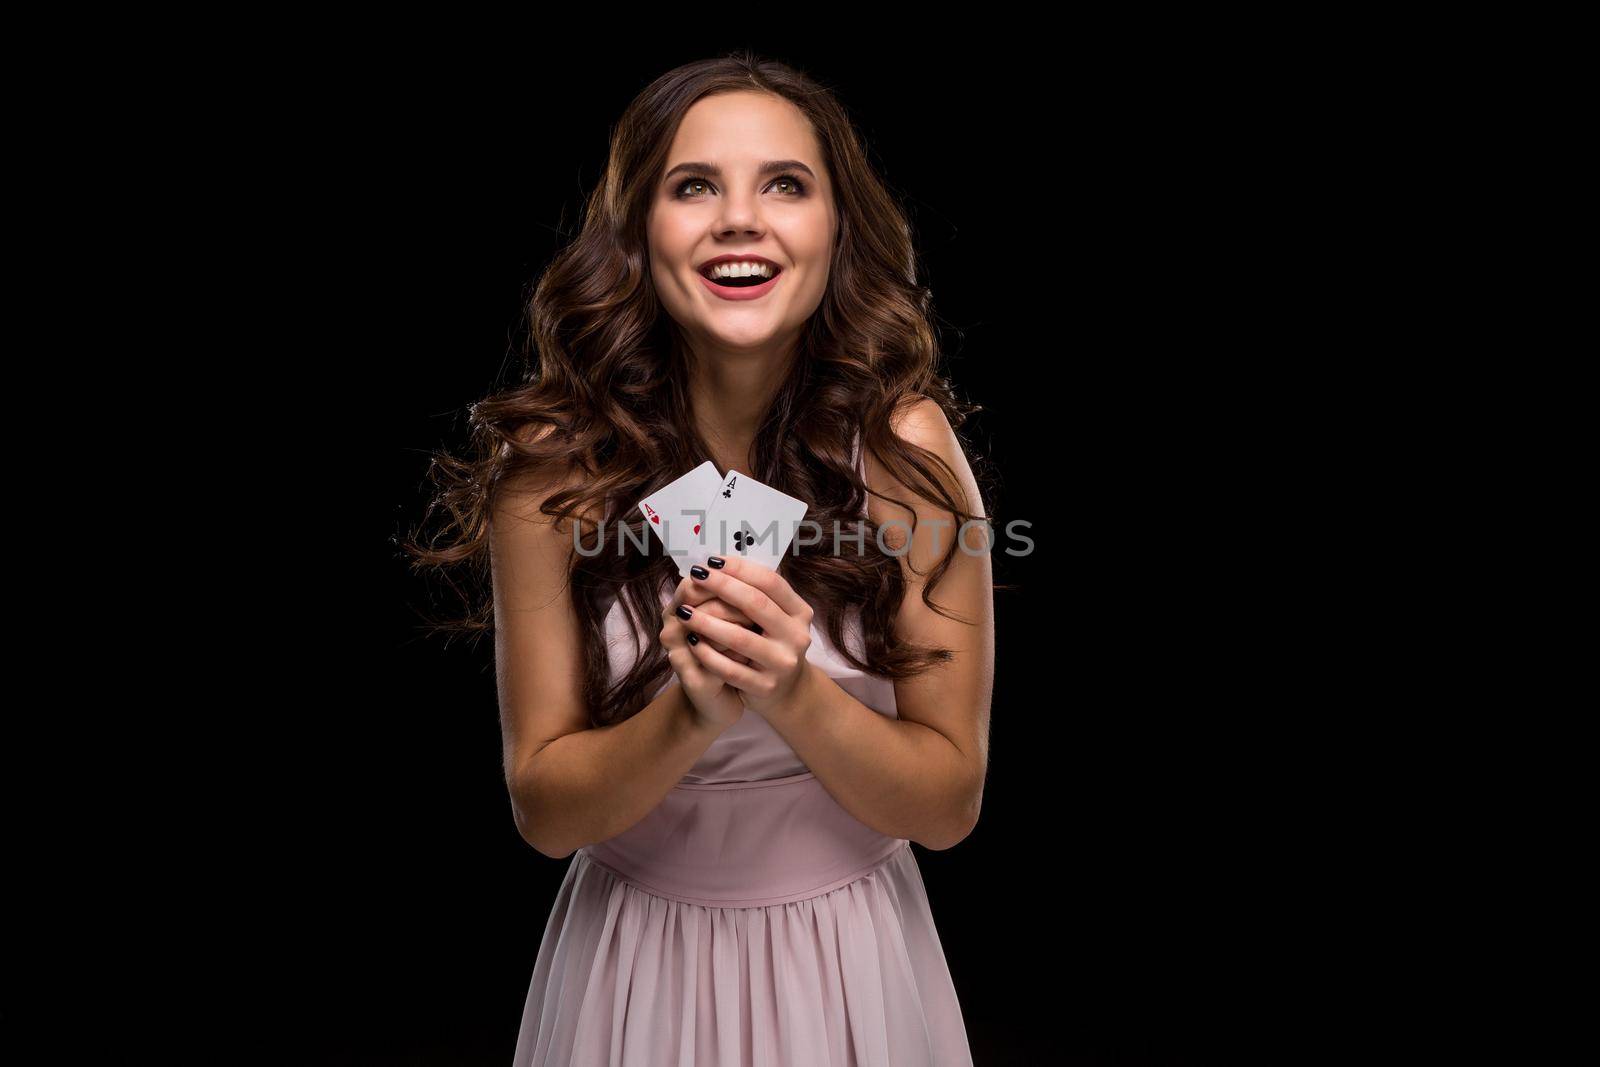 Attractive young woman holding the winning combination of poker cards by nazarovsergey